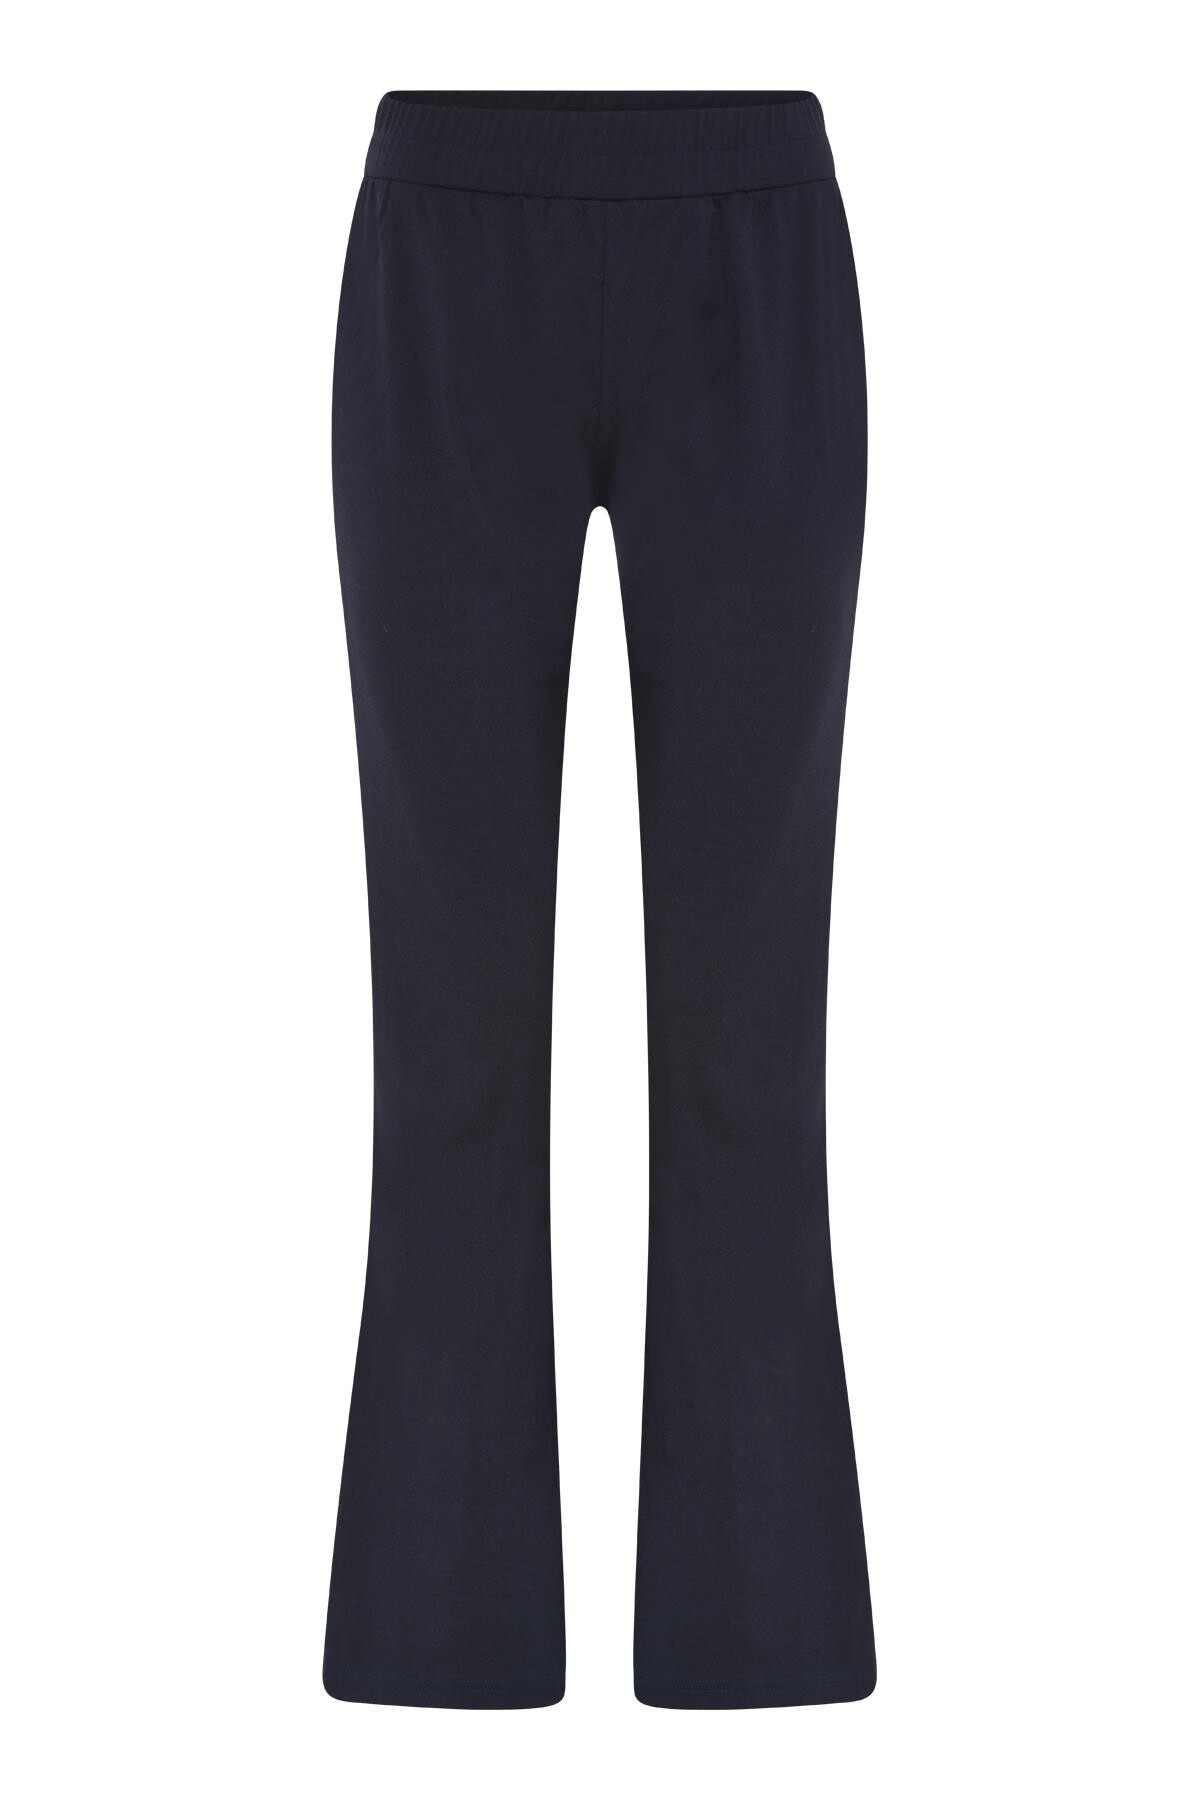 IN FRONT HAILY BOOT CUT PANTS 15355 591 (Navy 591)